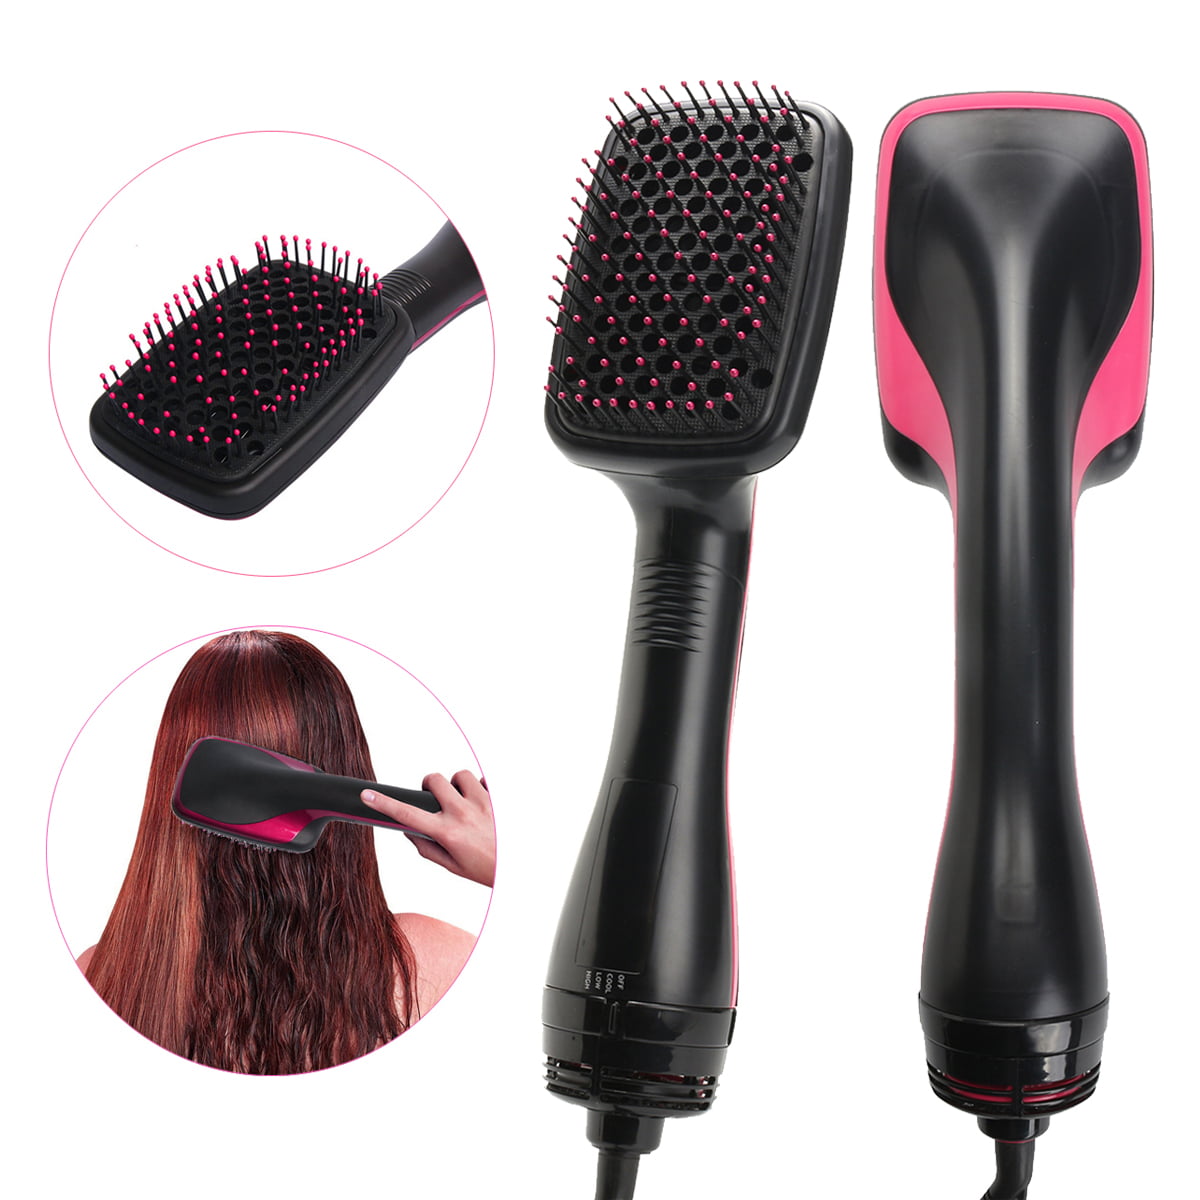 salon beauty, one-step hair dryer & styler smoothing , 2 in 1 ionic hot air  hair straightener brush, negative ion generator for all hair types